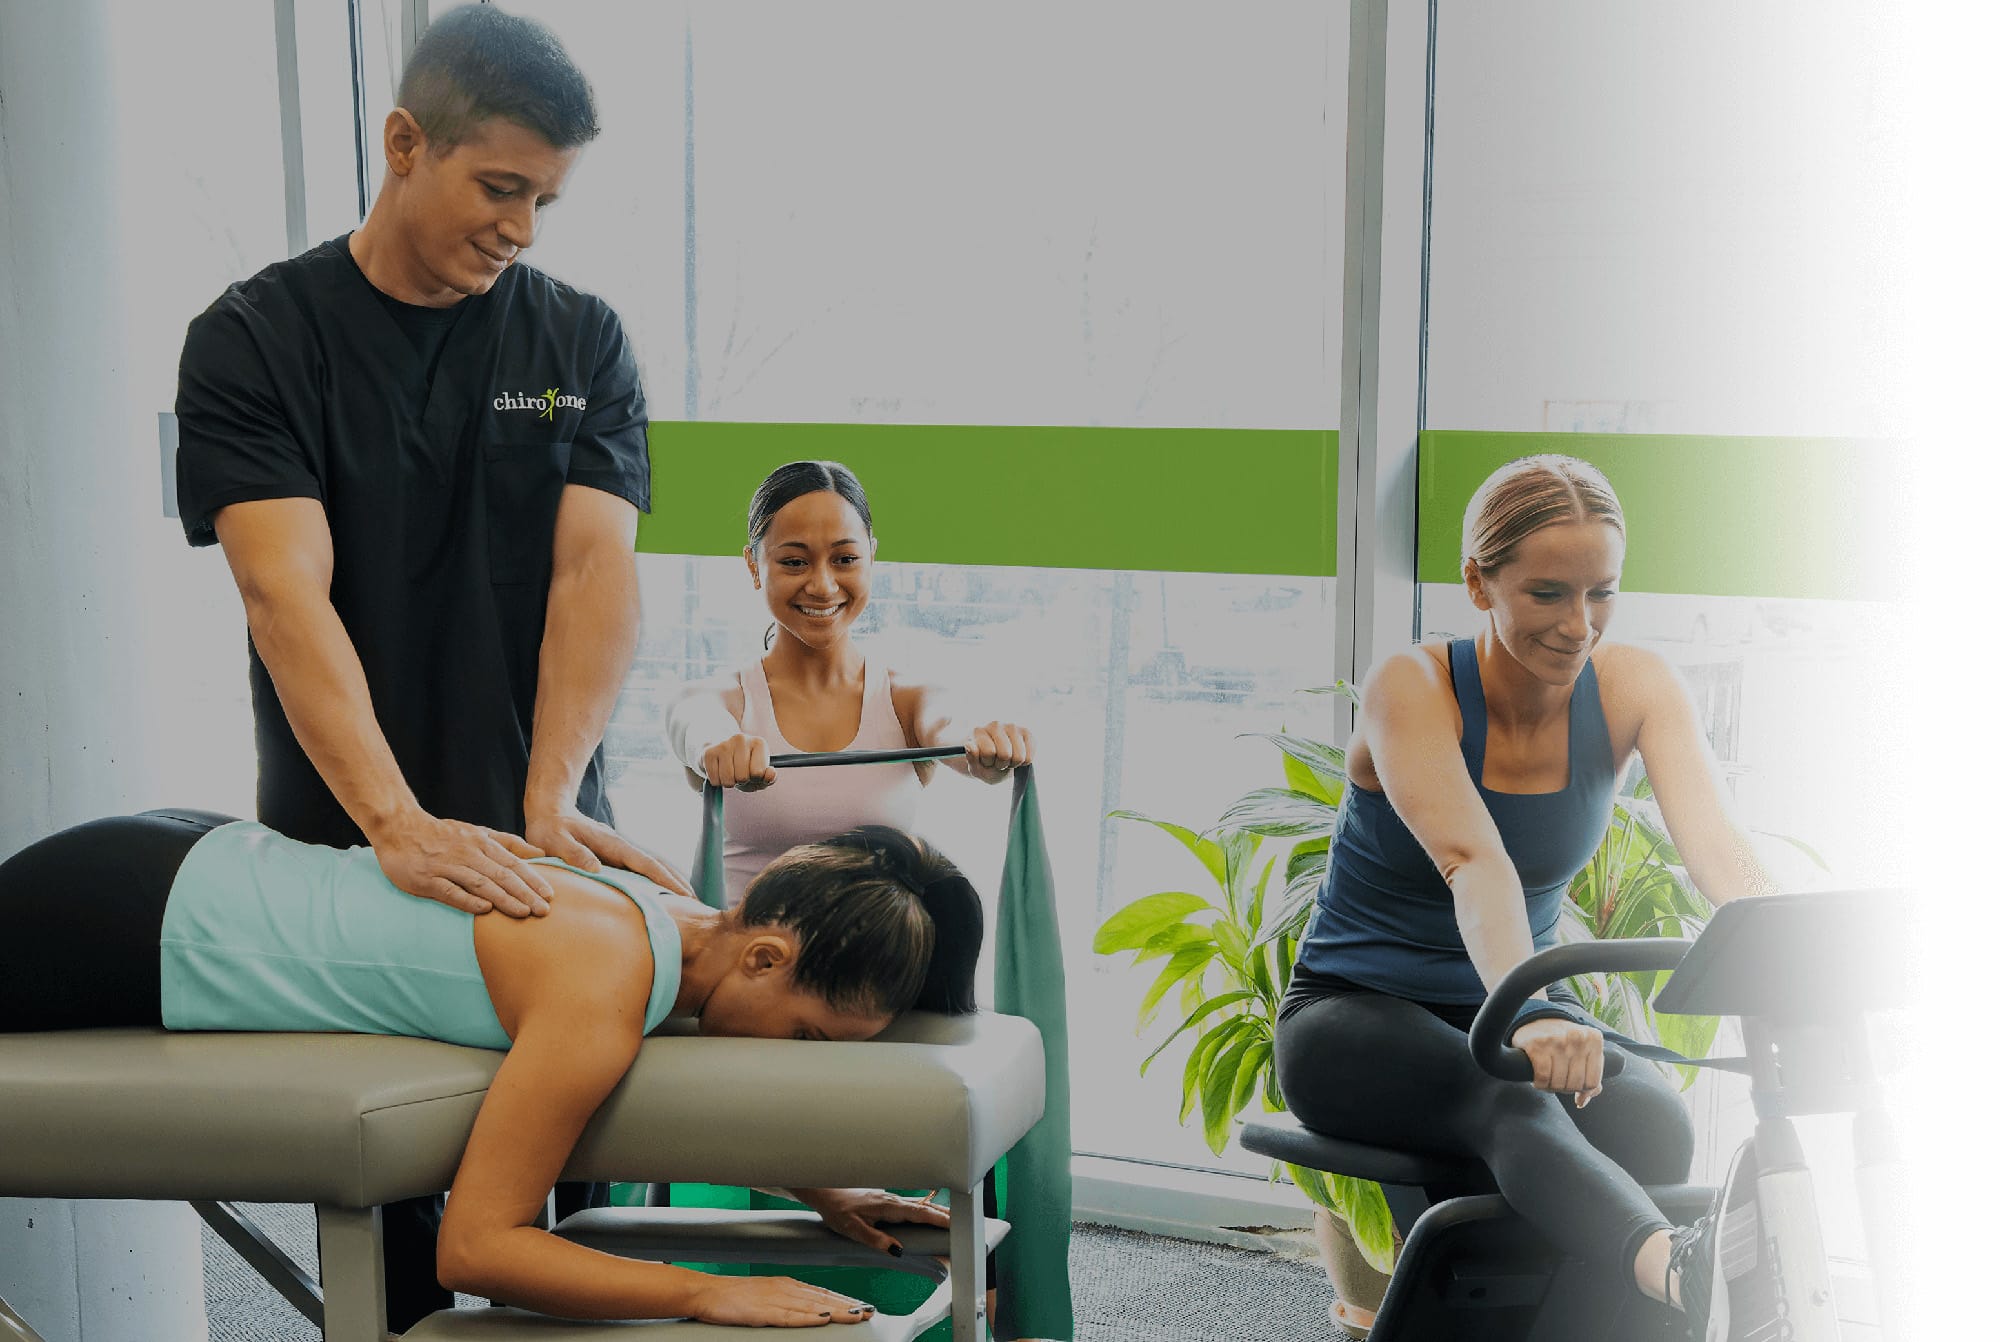 A woman receives a chiropractic adjustment at a Chiro One clinic while patients perform rehabilitative therapies nearby